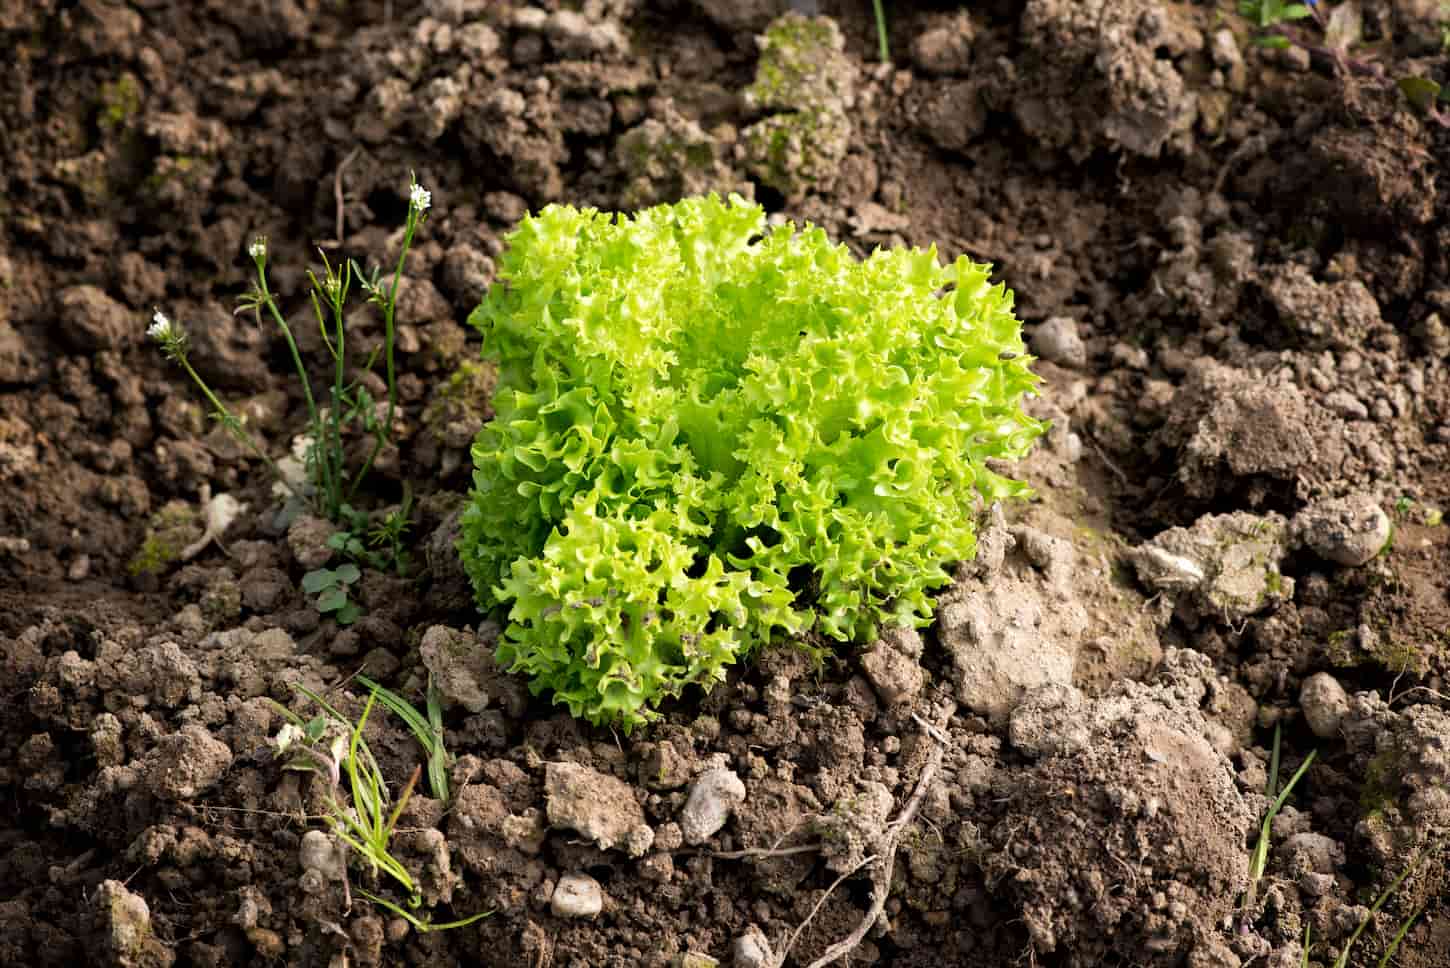 An image of a Fresh clump of bright gourmet green lettuce plant surrounded by bare clay garden soil.